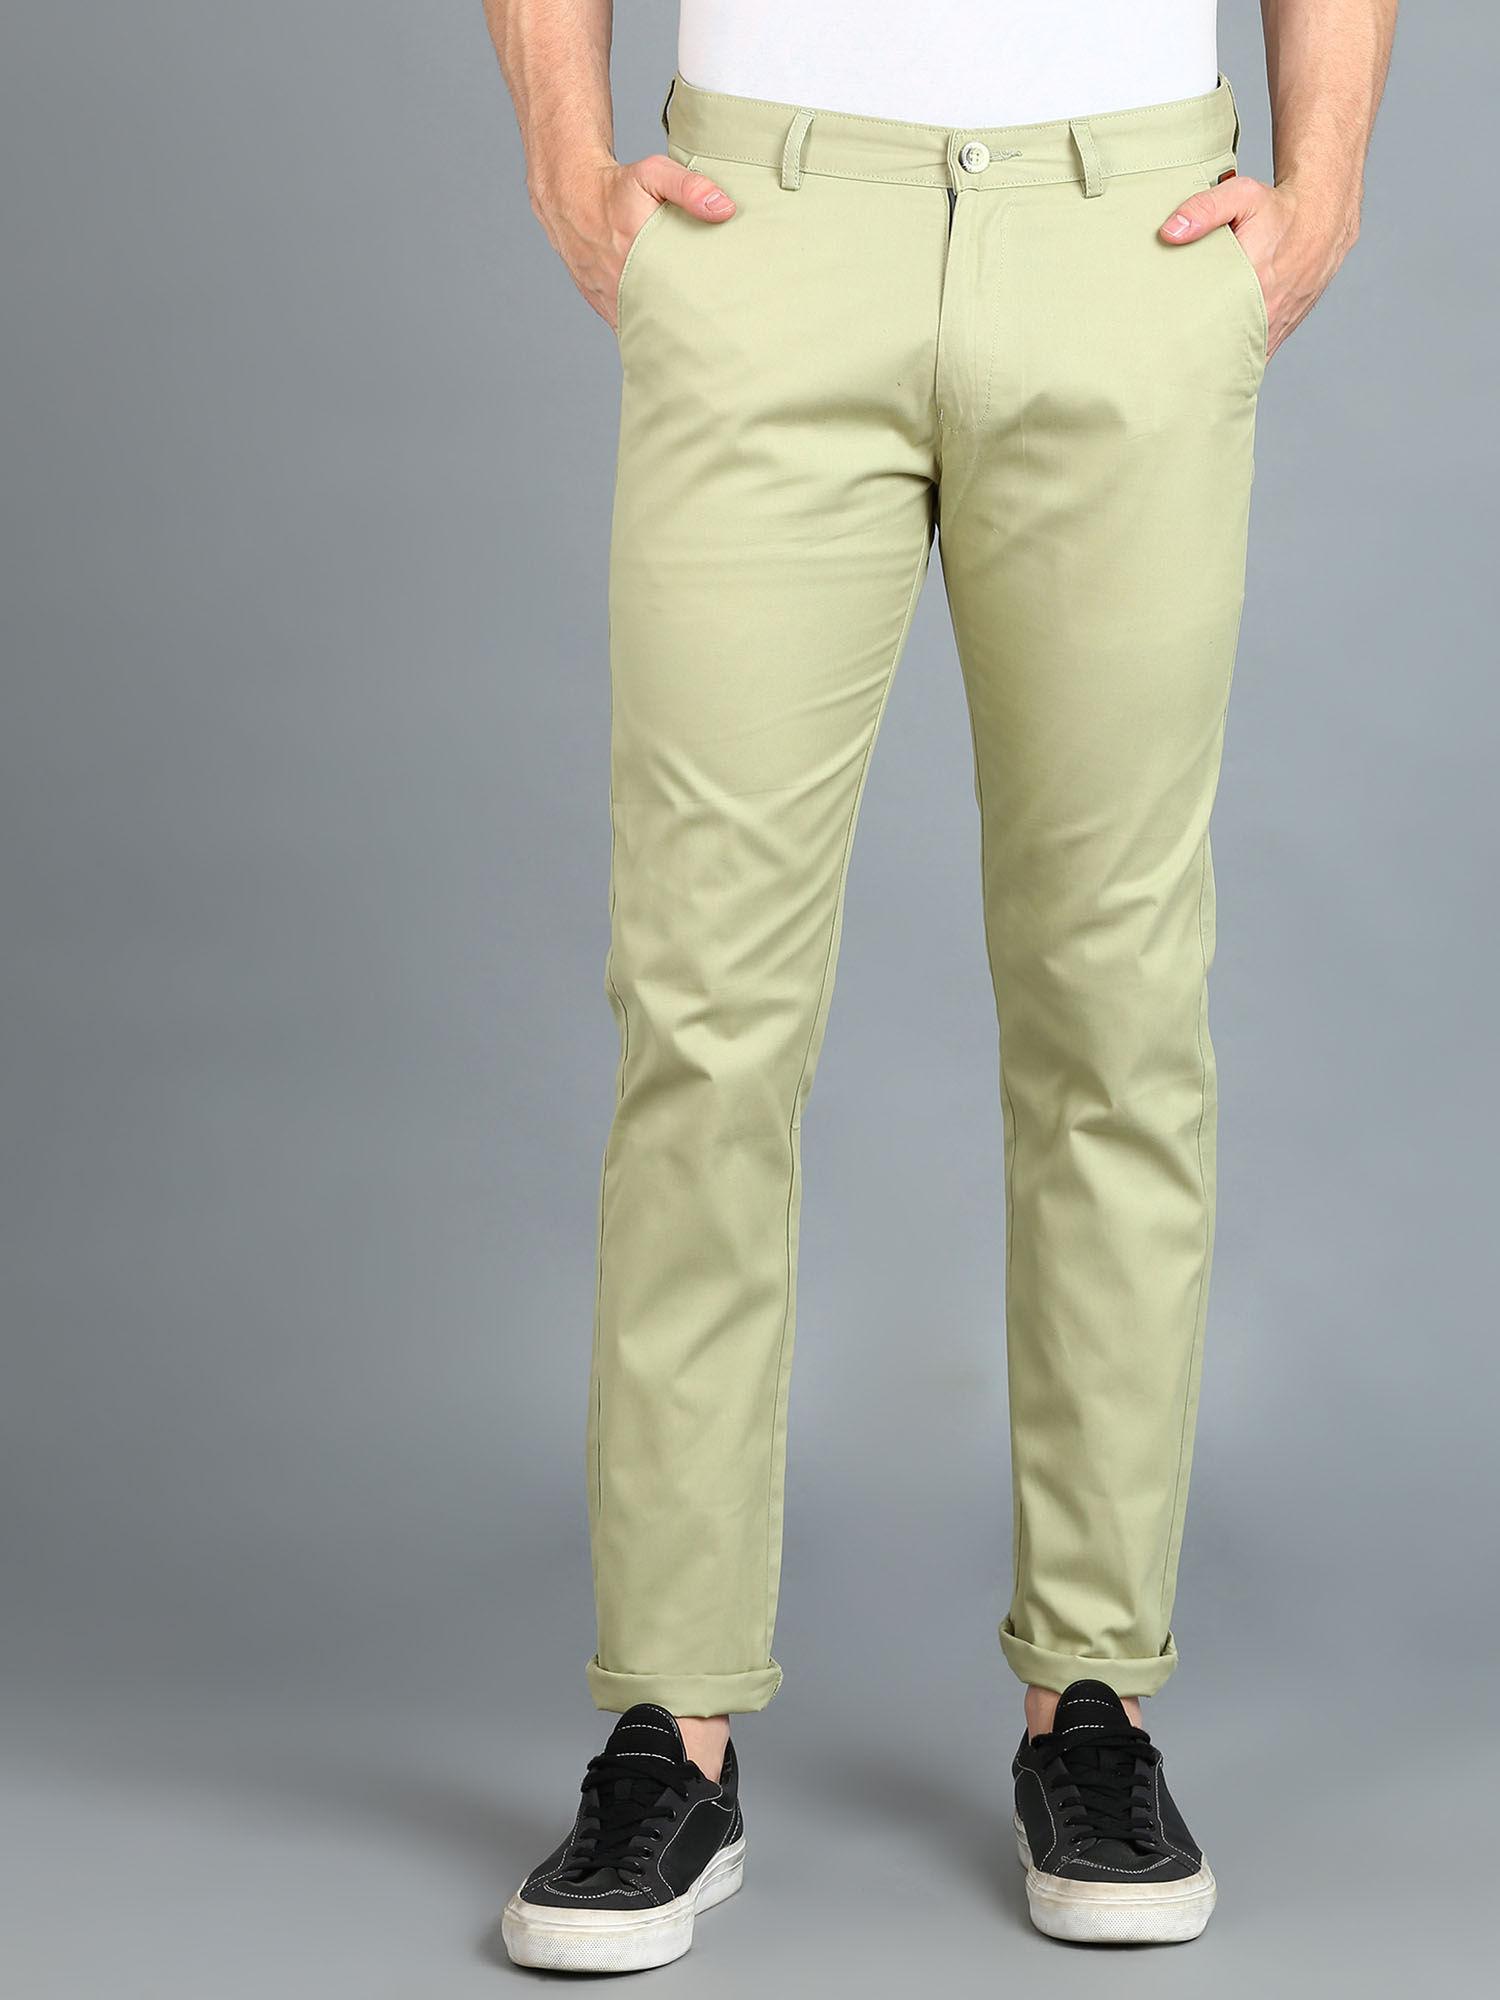 men pista green cotton slim fit casual chinos trousers